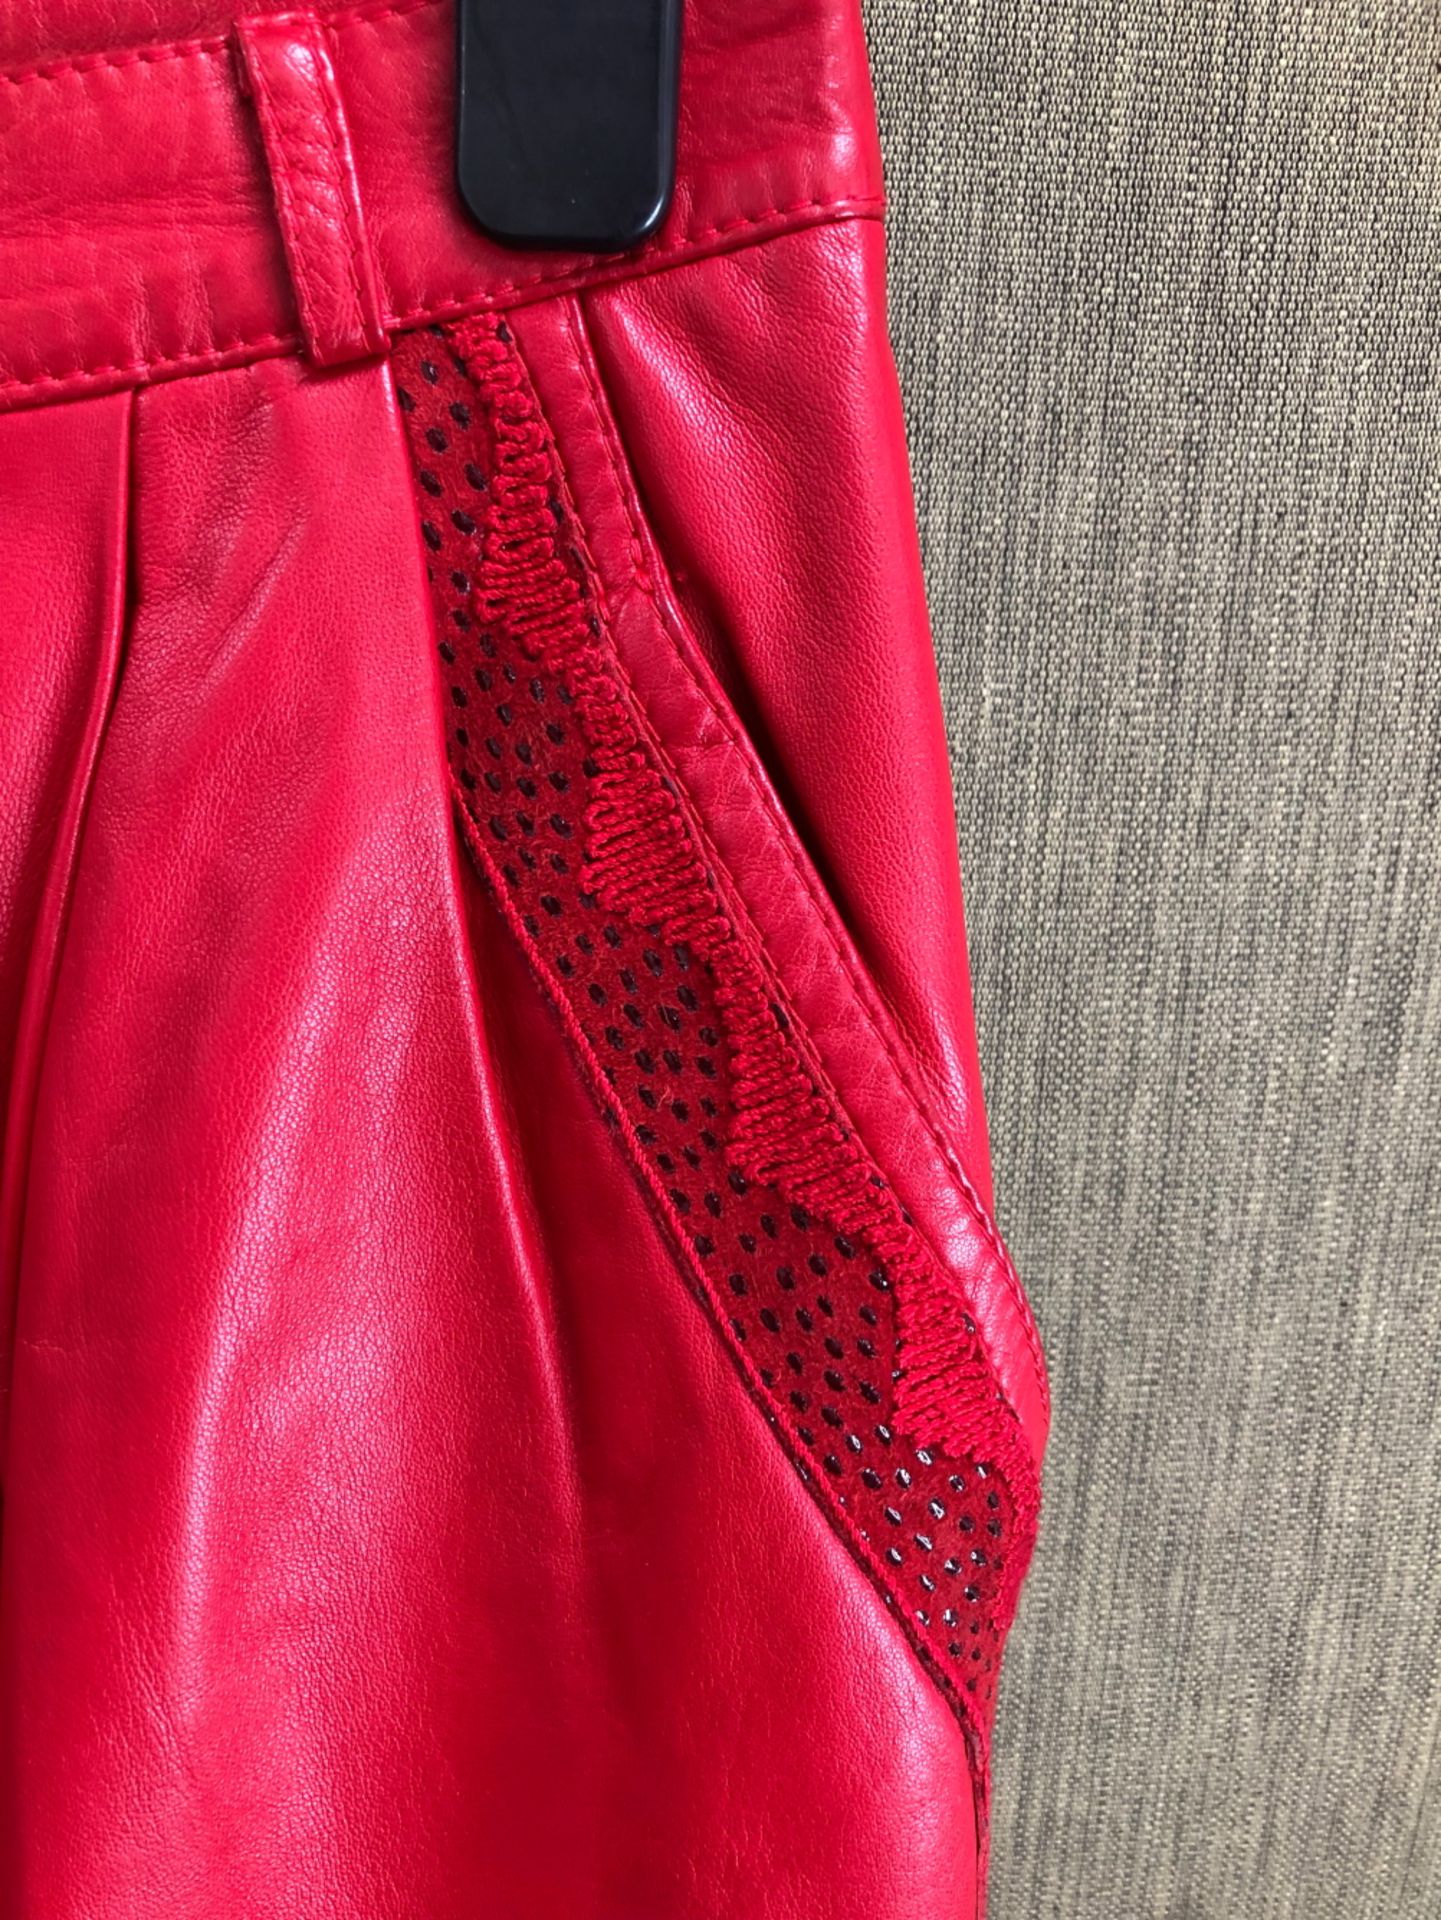 A PAIR OF AMORETTI ITALY RED LEATHER EFFECT TROUSERS WITH DETAIL RUNNING DOWN THE OUTER LEG, - Image 8 of 21